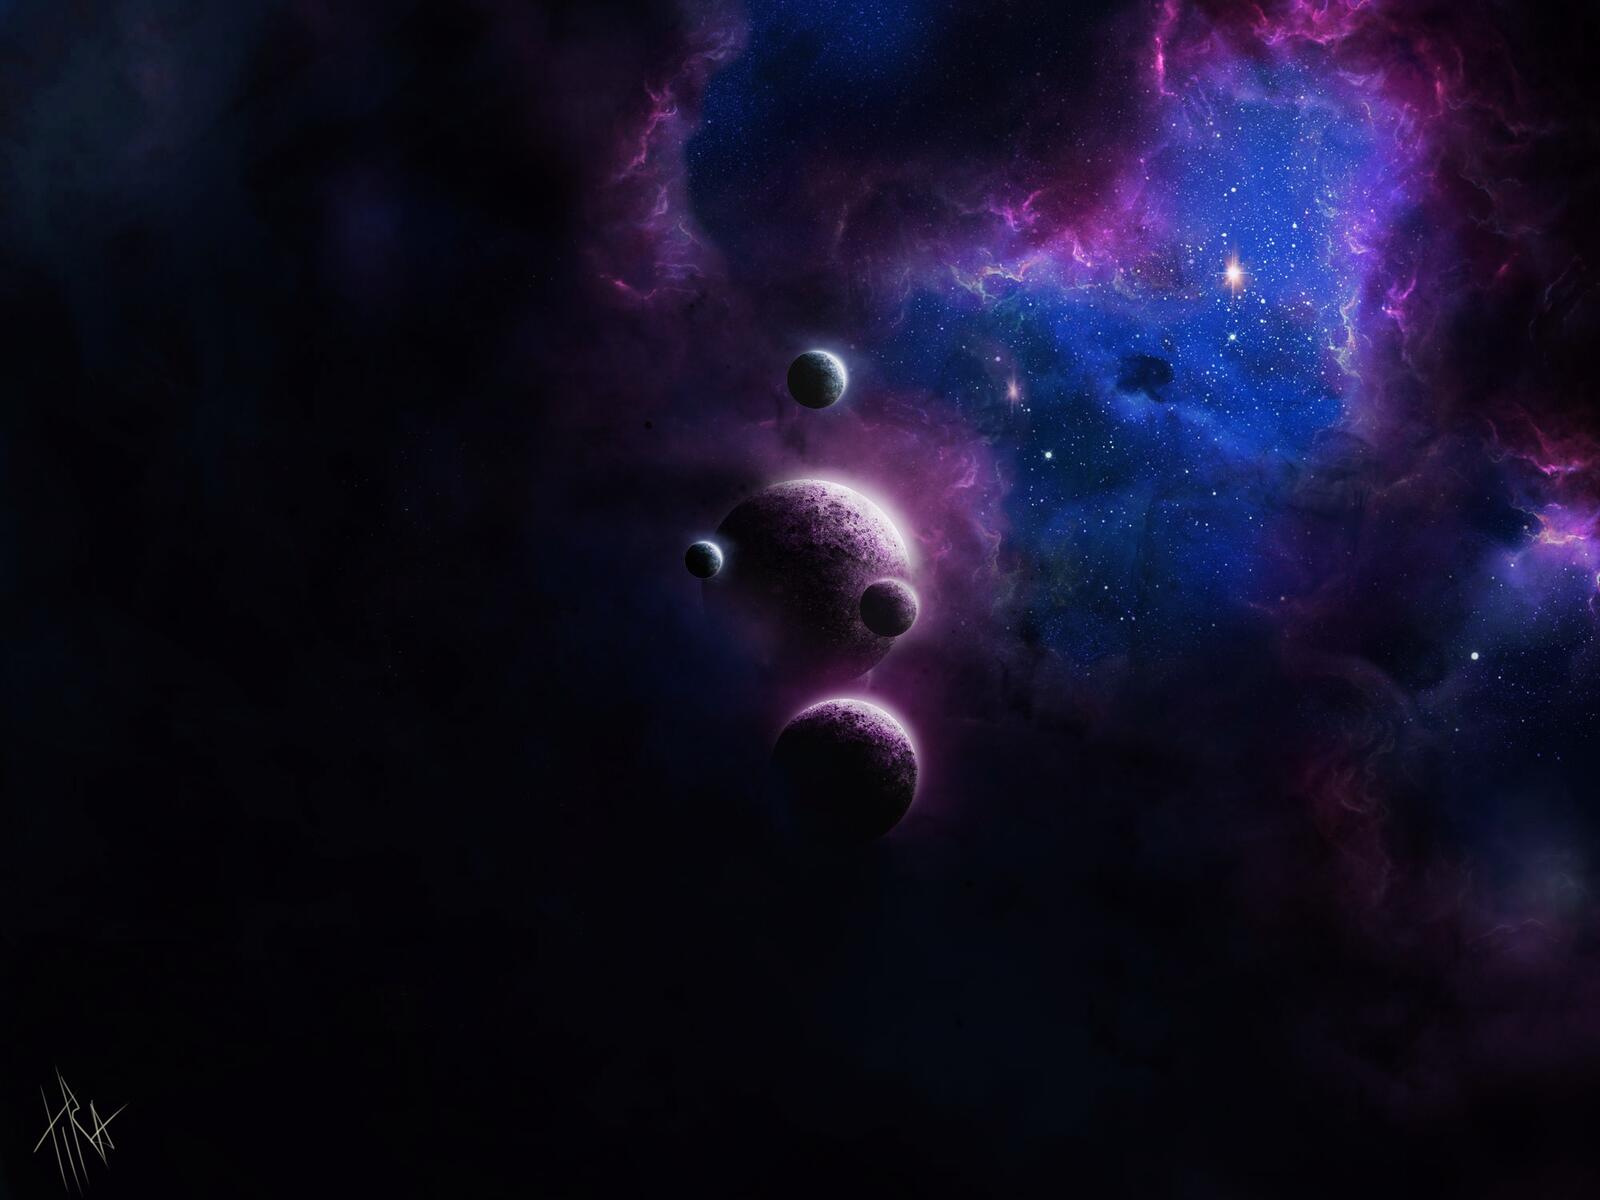 Wallpapers science fiction planets artwork on the desktop